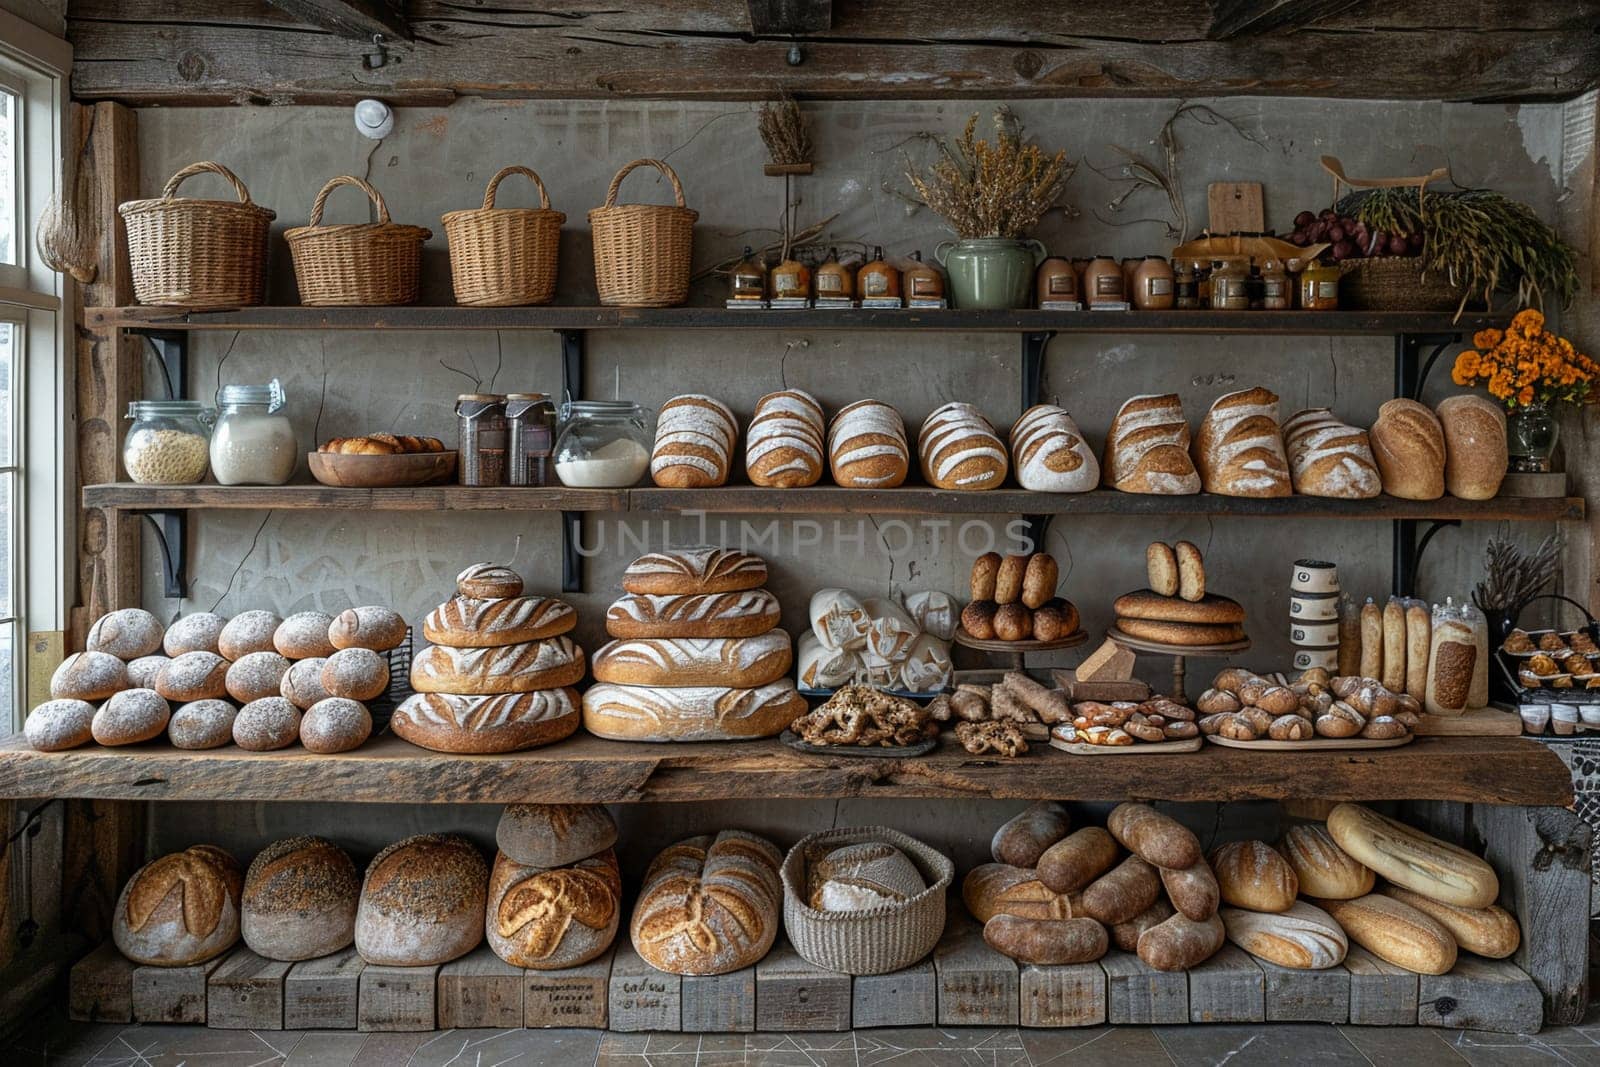 Rustic bread bakery with a wood-fired oven and artisan loaves.